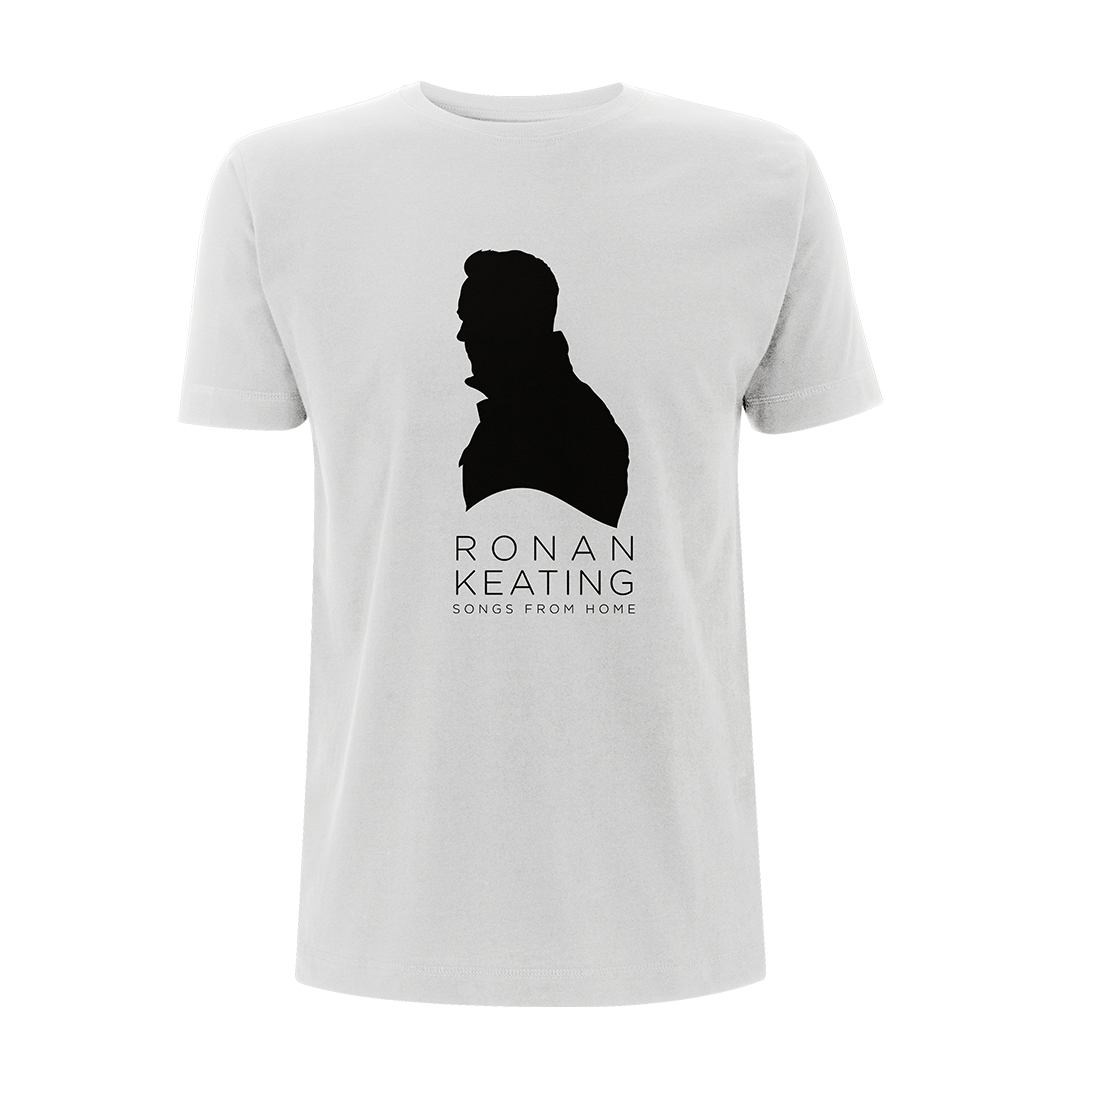 Ronan Keating - Songs From Home Silhouette White T-Shirt